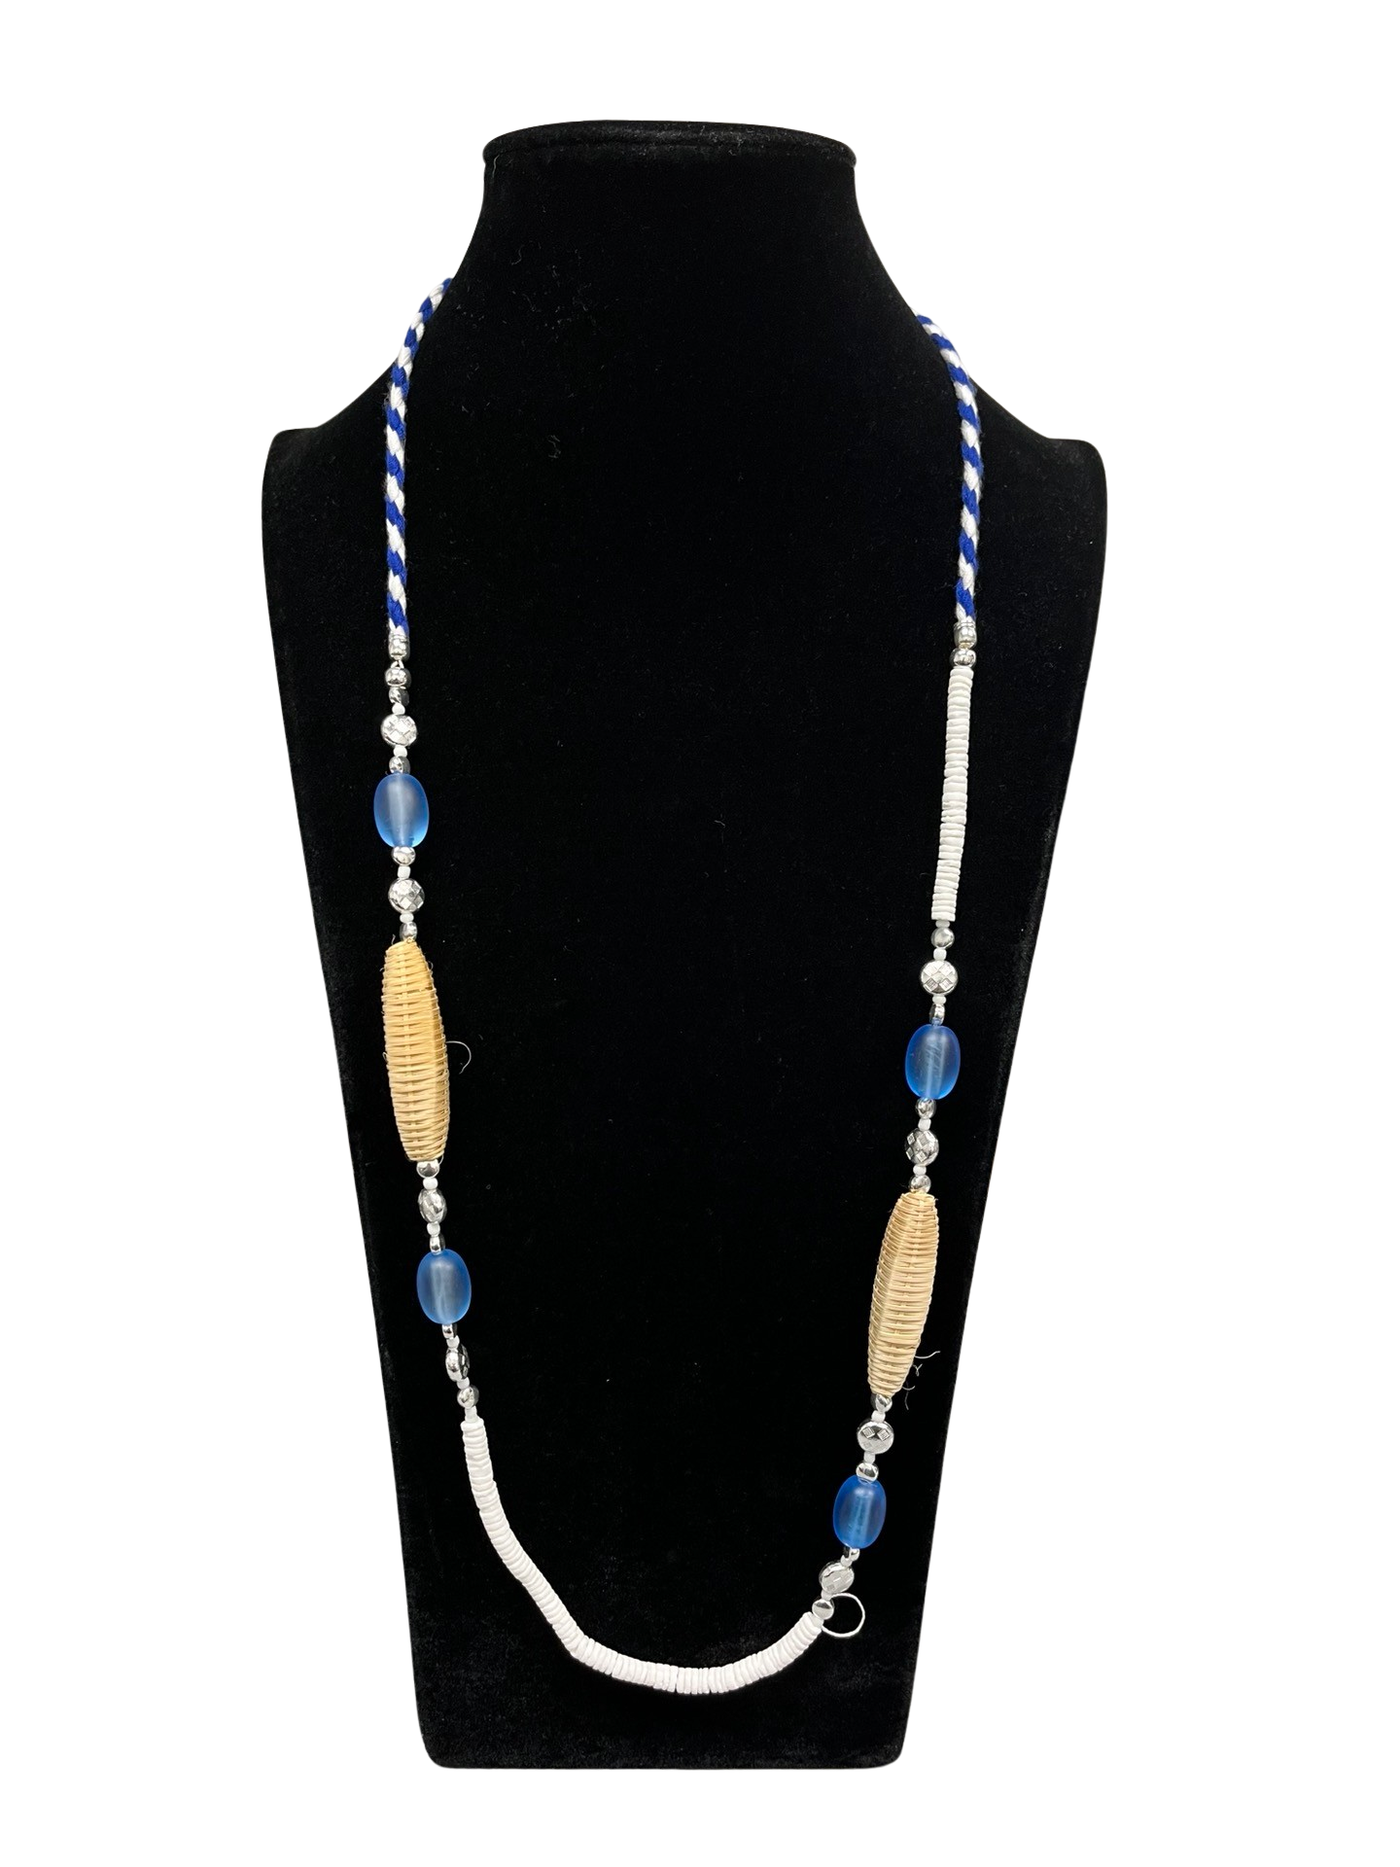 Blue & White Long Statement Necklace